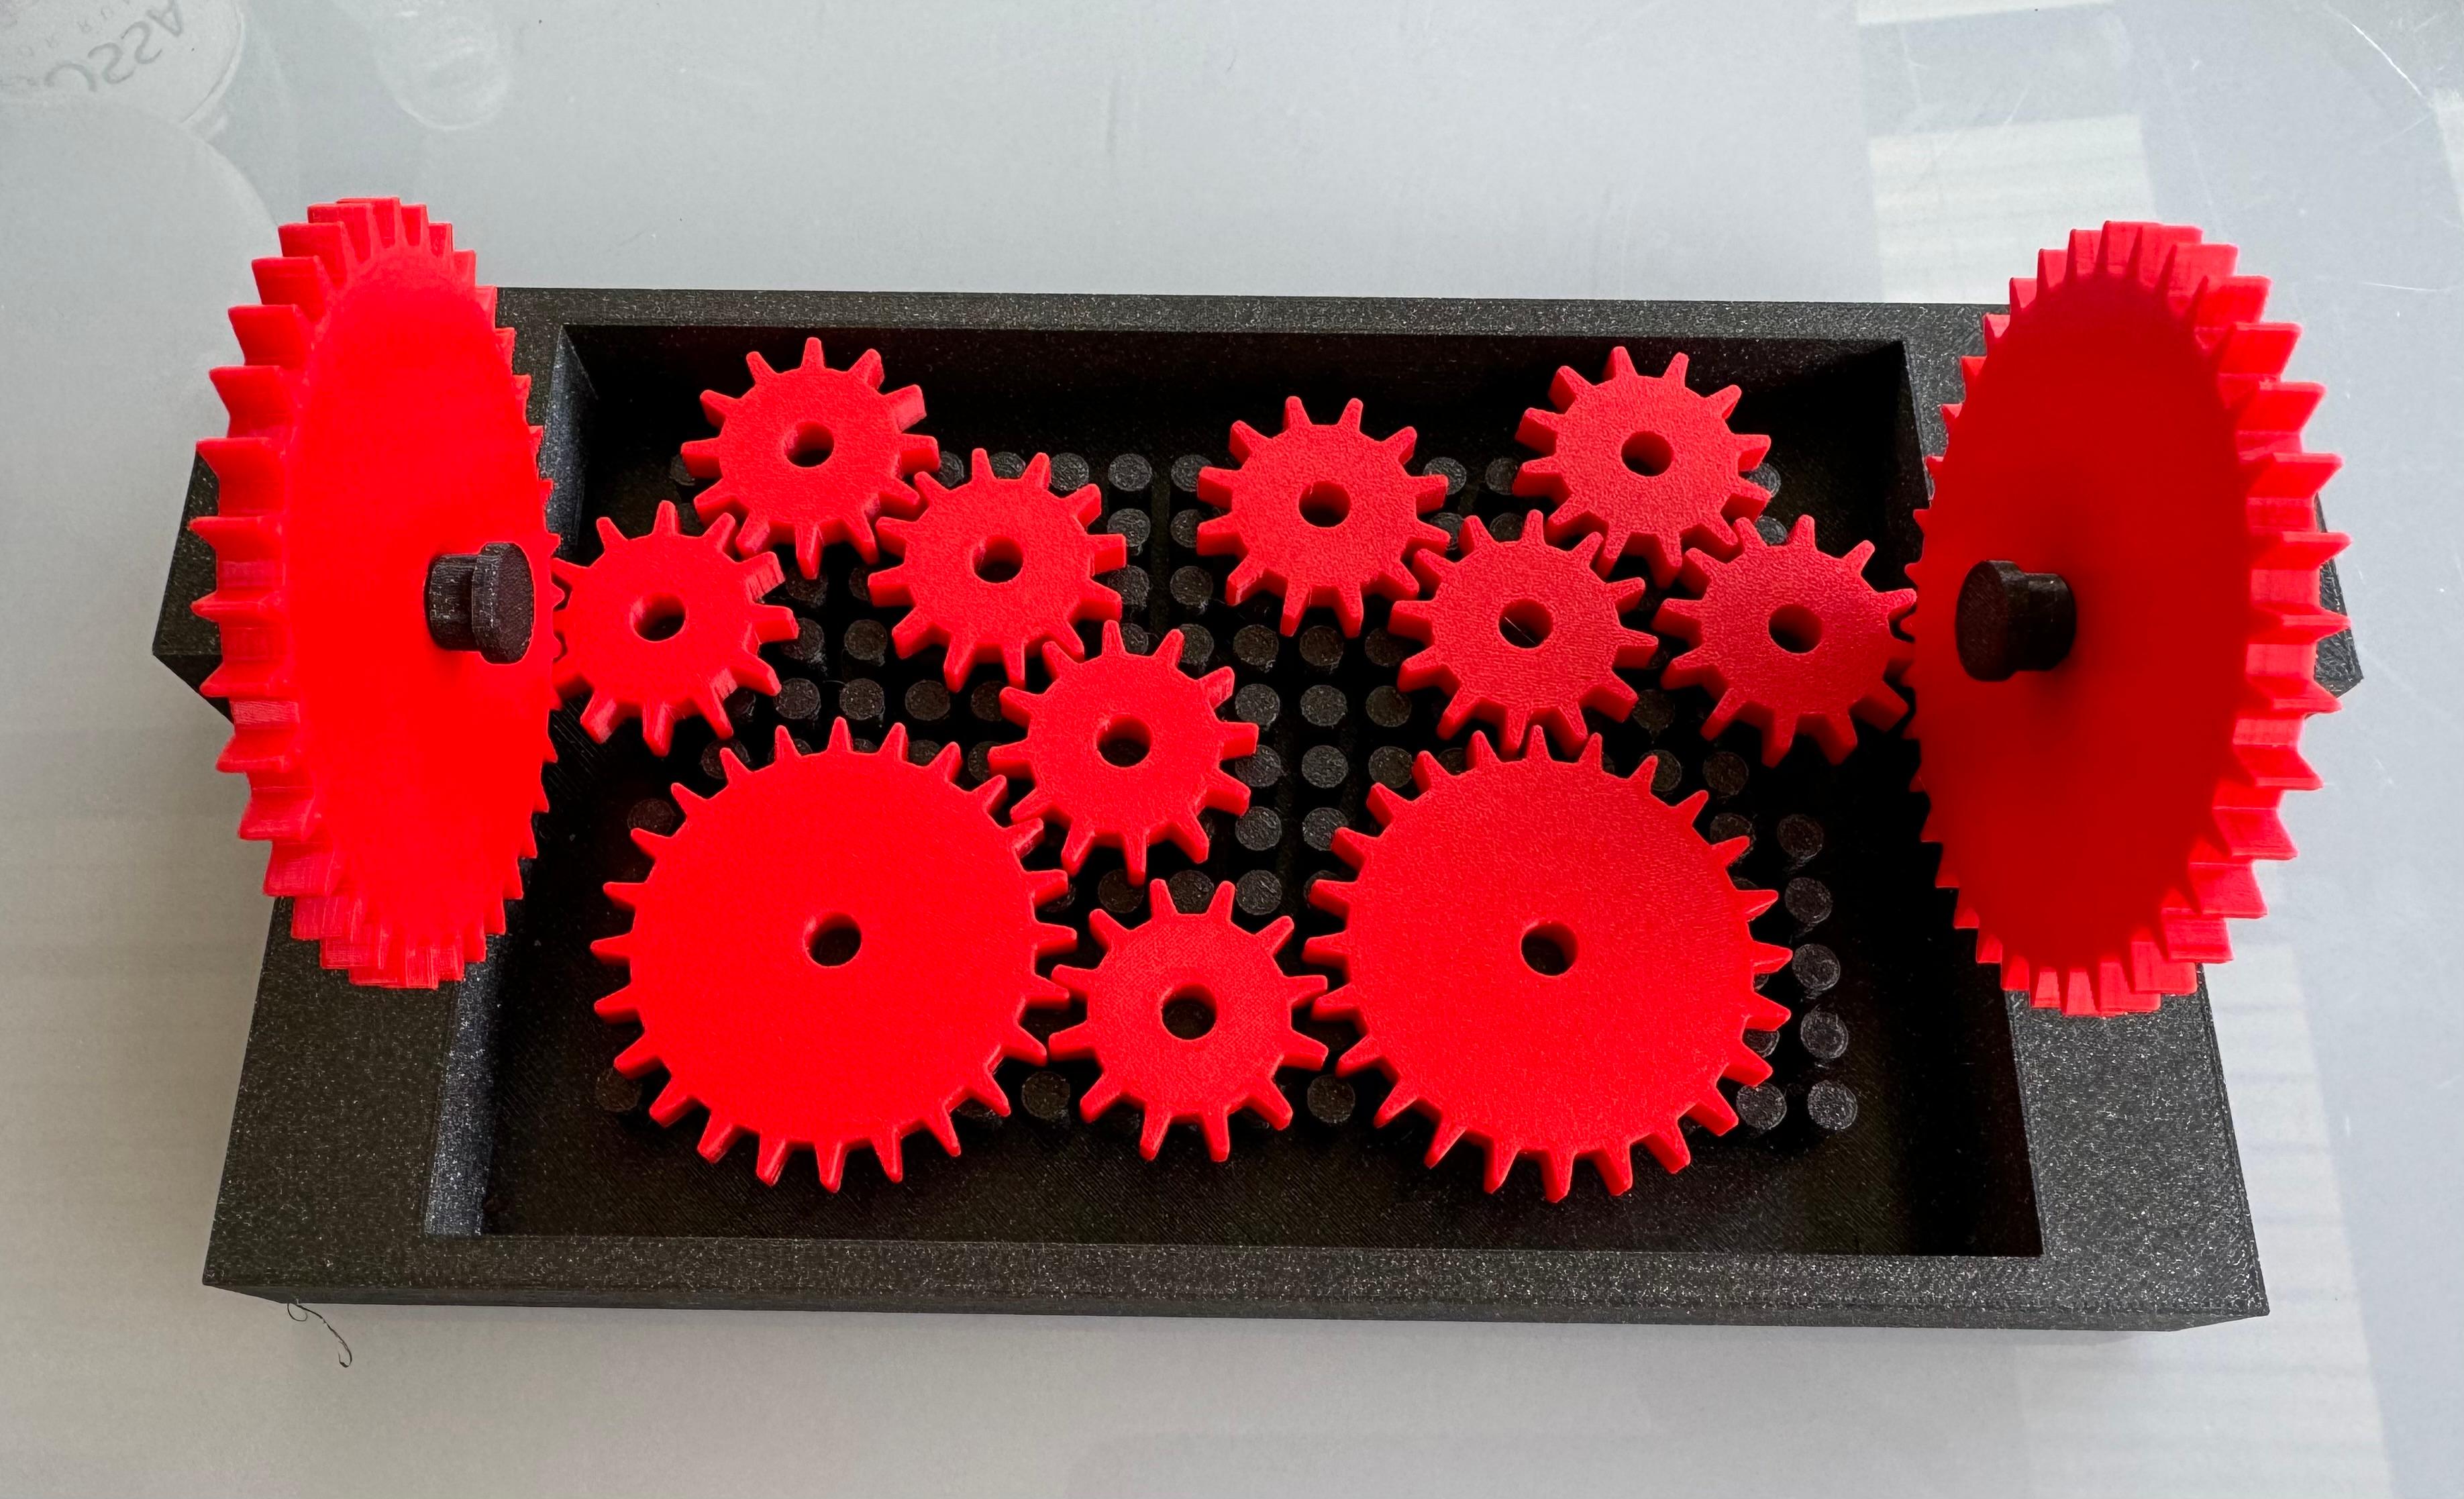 Gear Pathing Maze - concept level - Working Solution with one useless gear (in the middle top row)
Printed with Prusament PLA (Galaxy black and Lipstick red) - 3d model